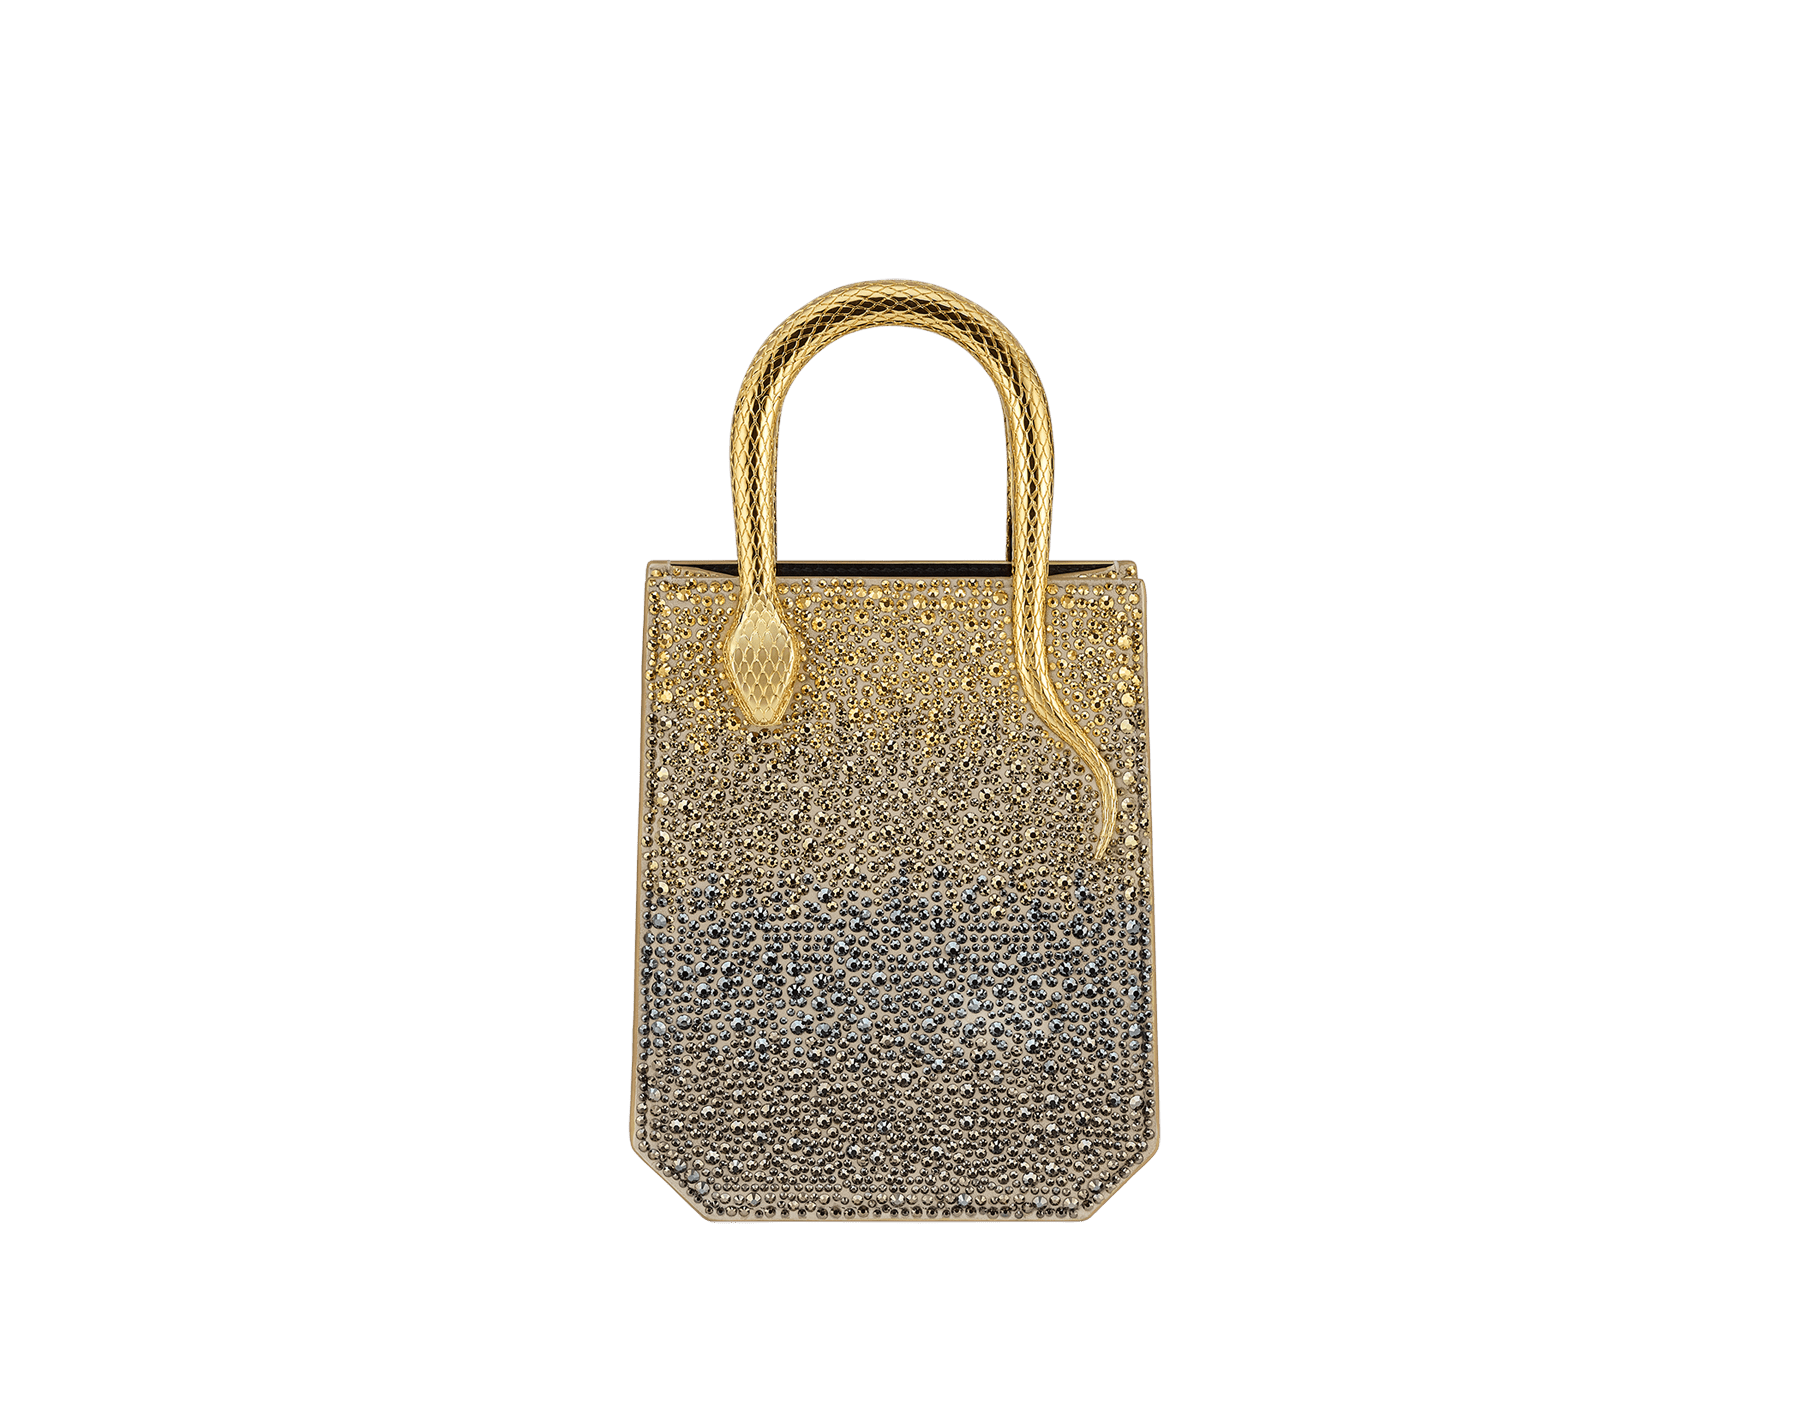 Serpentine mini tote bag in natural suede with different-size degradé gold crystals and black nappa leather lining. Captivating snake body-shaped handles in gold-plated brass embellished with engraved scales and red enamel eyes. 292824 image 1